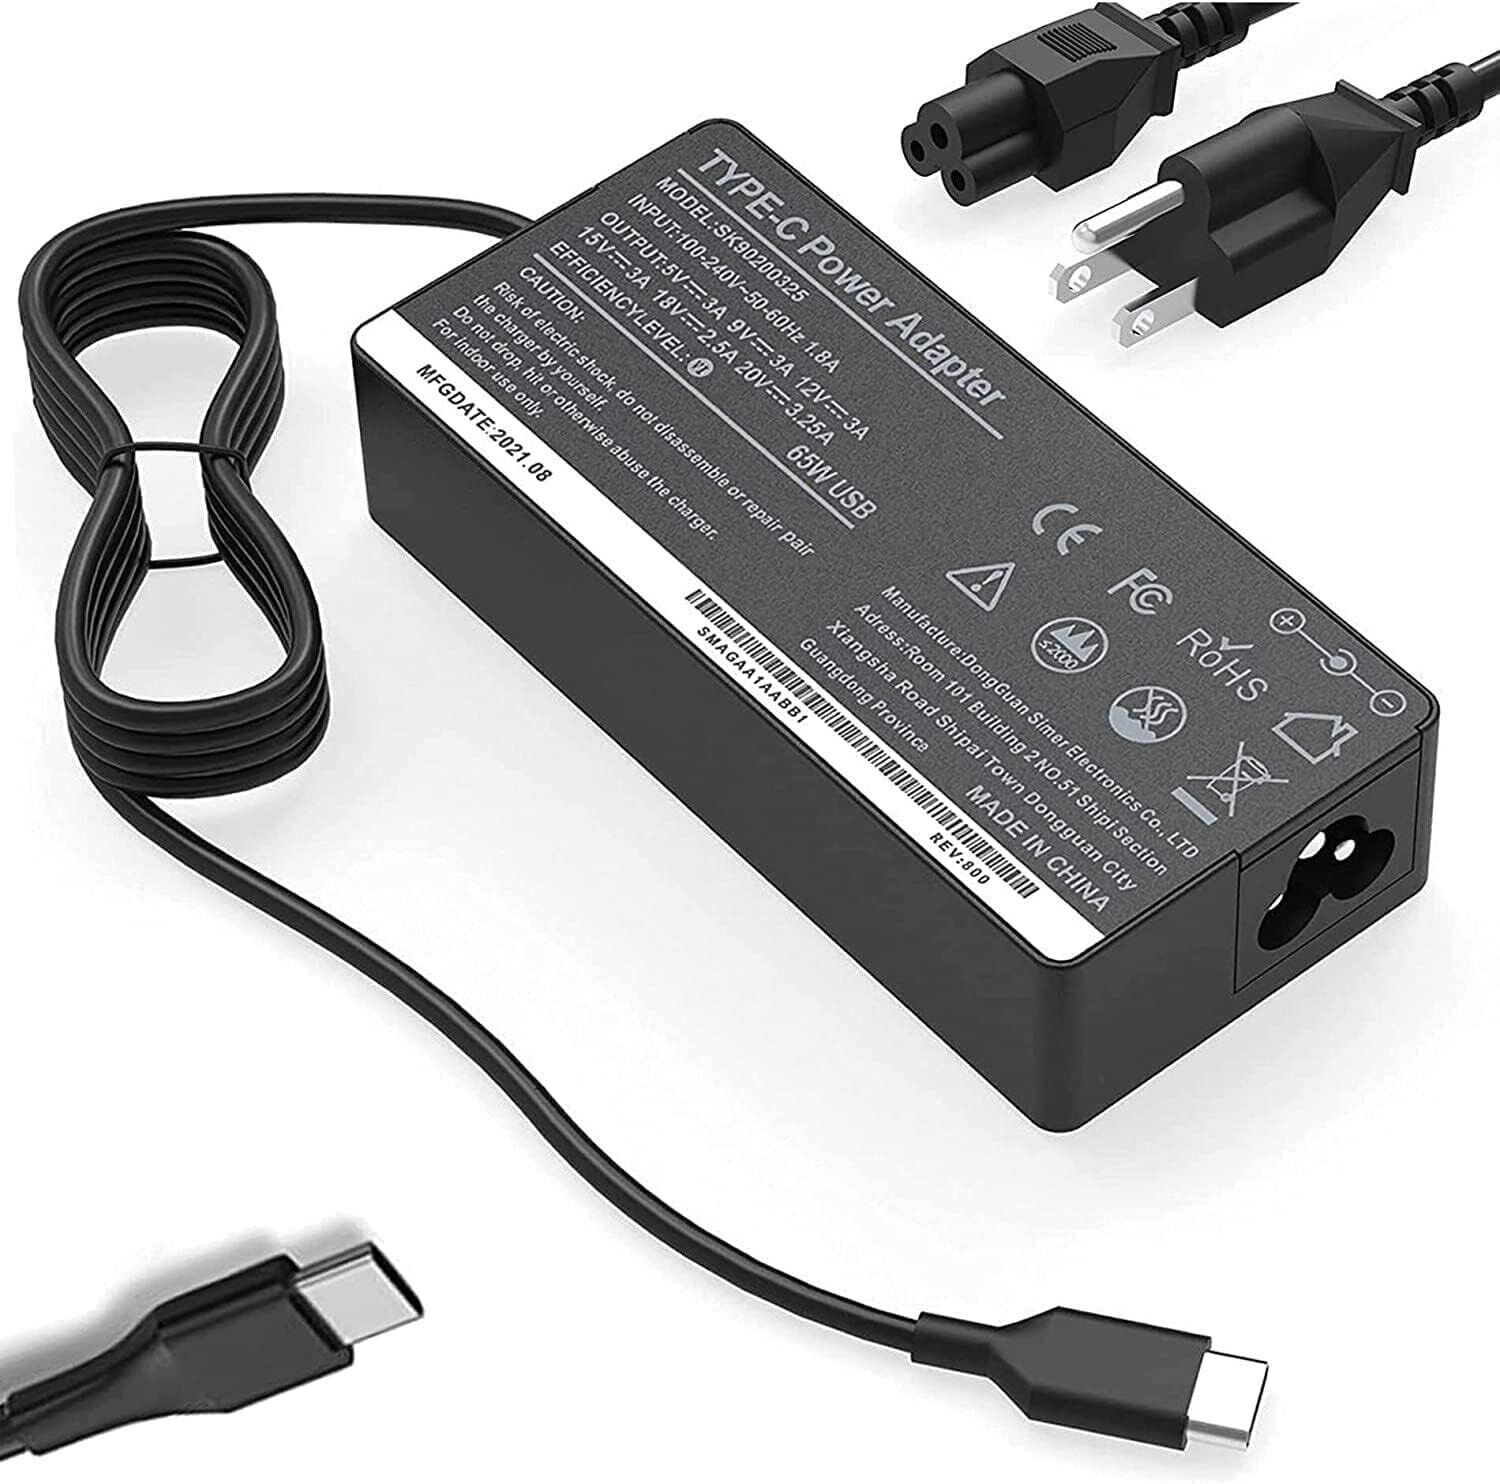 Charger for Lenovo Laptop Computer-65W-45W-ThinkPad Yoga Chromebook 20V 3.25A